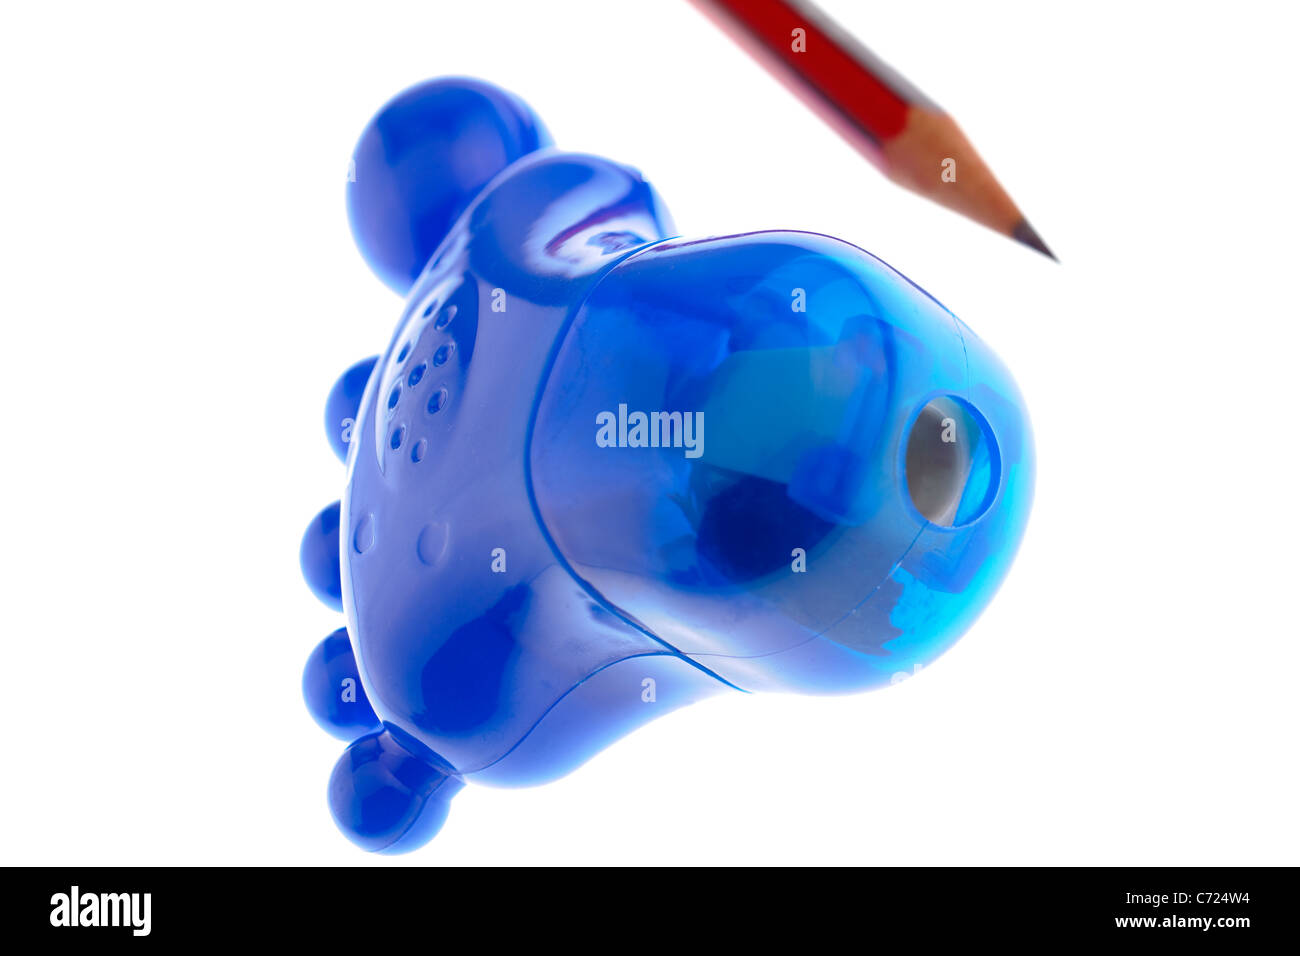 Blue foot shaped plastic pencil sharpener and sharpened pencil Stock Photo